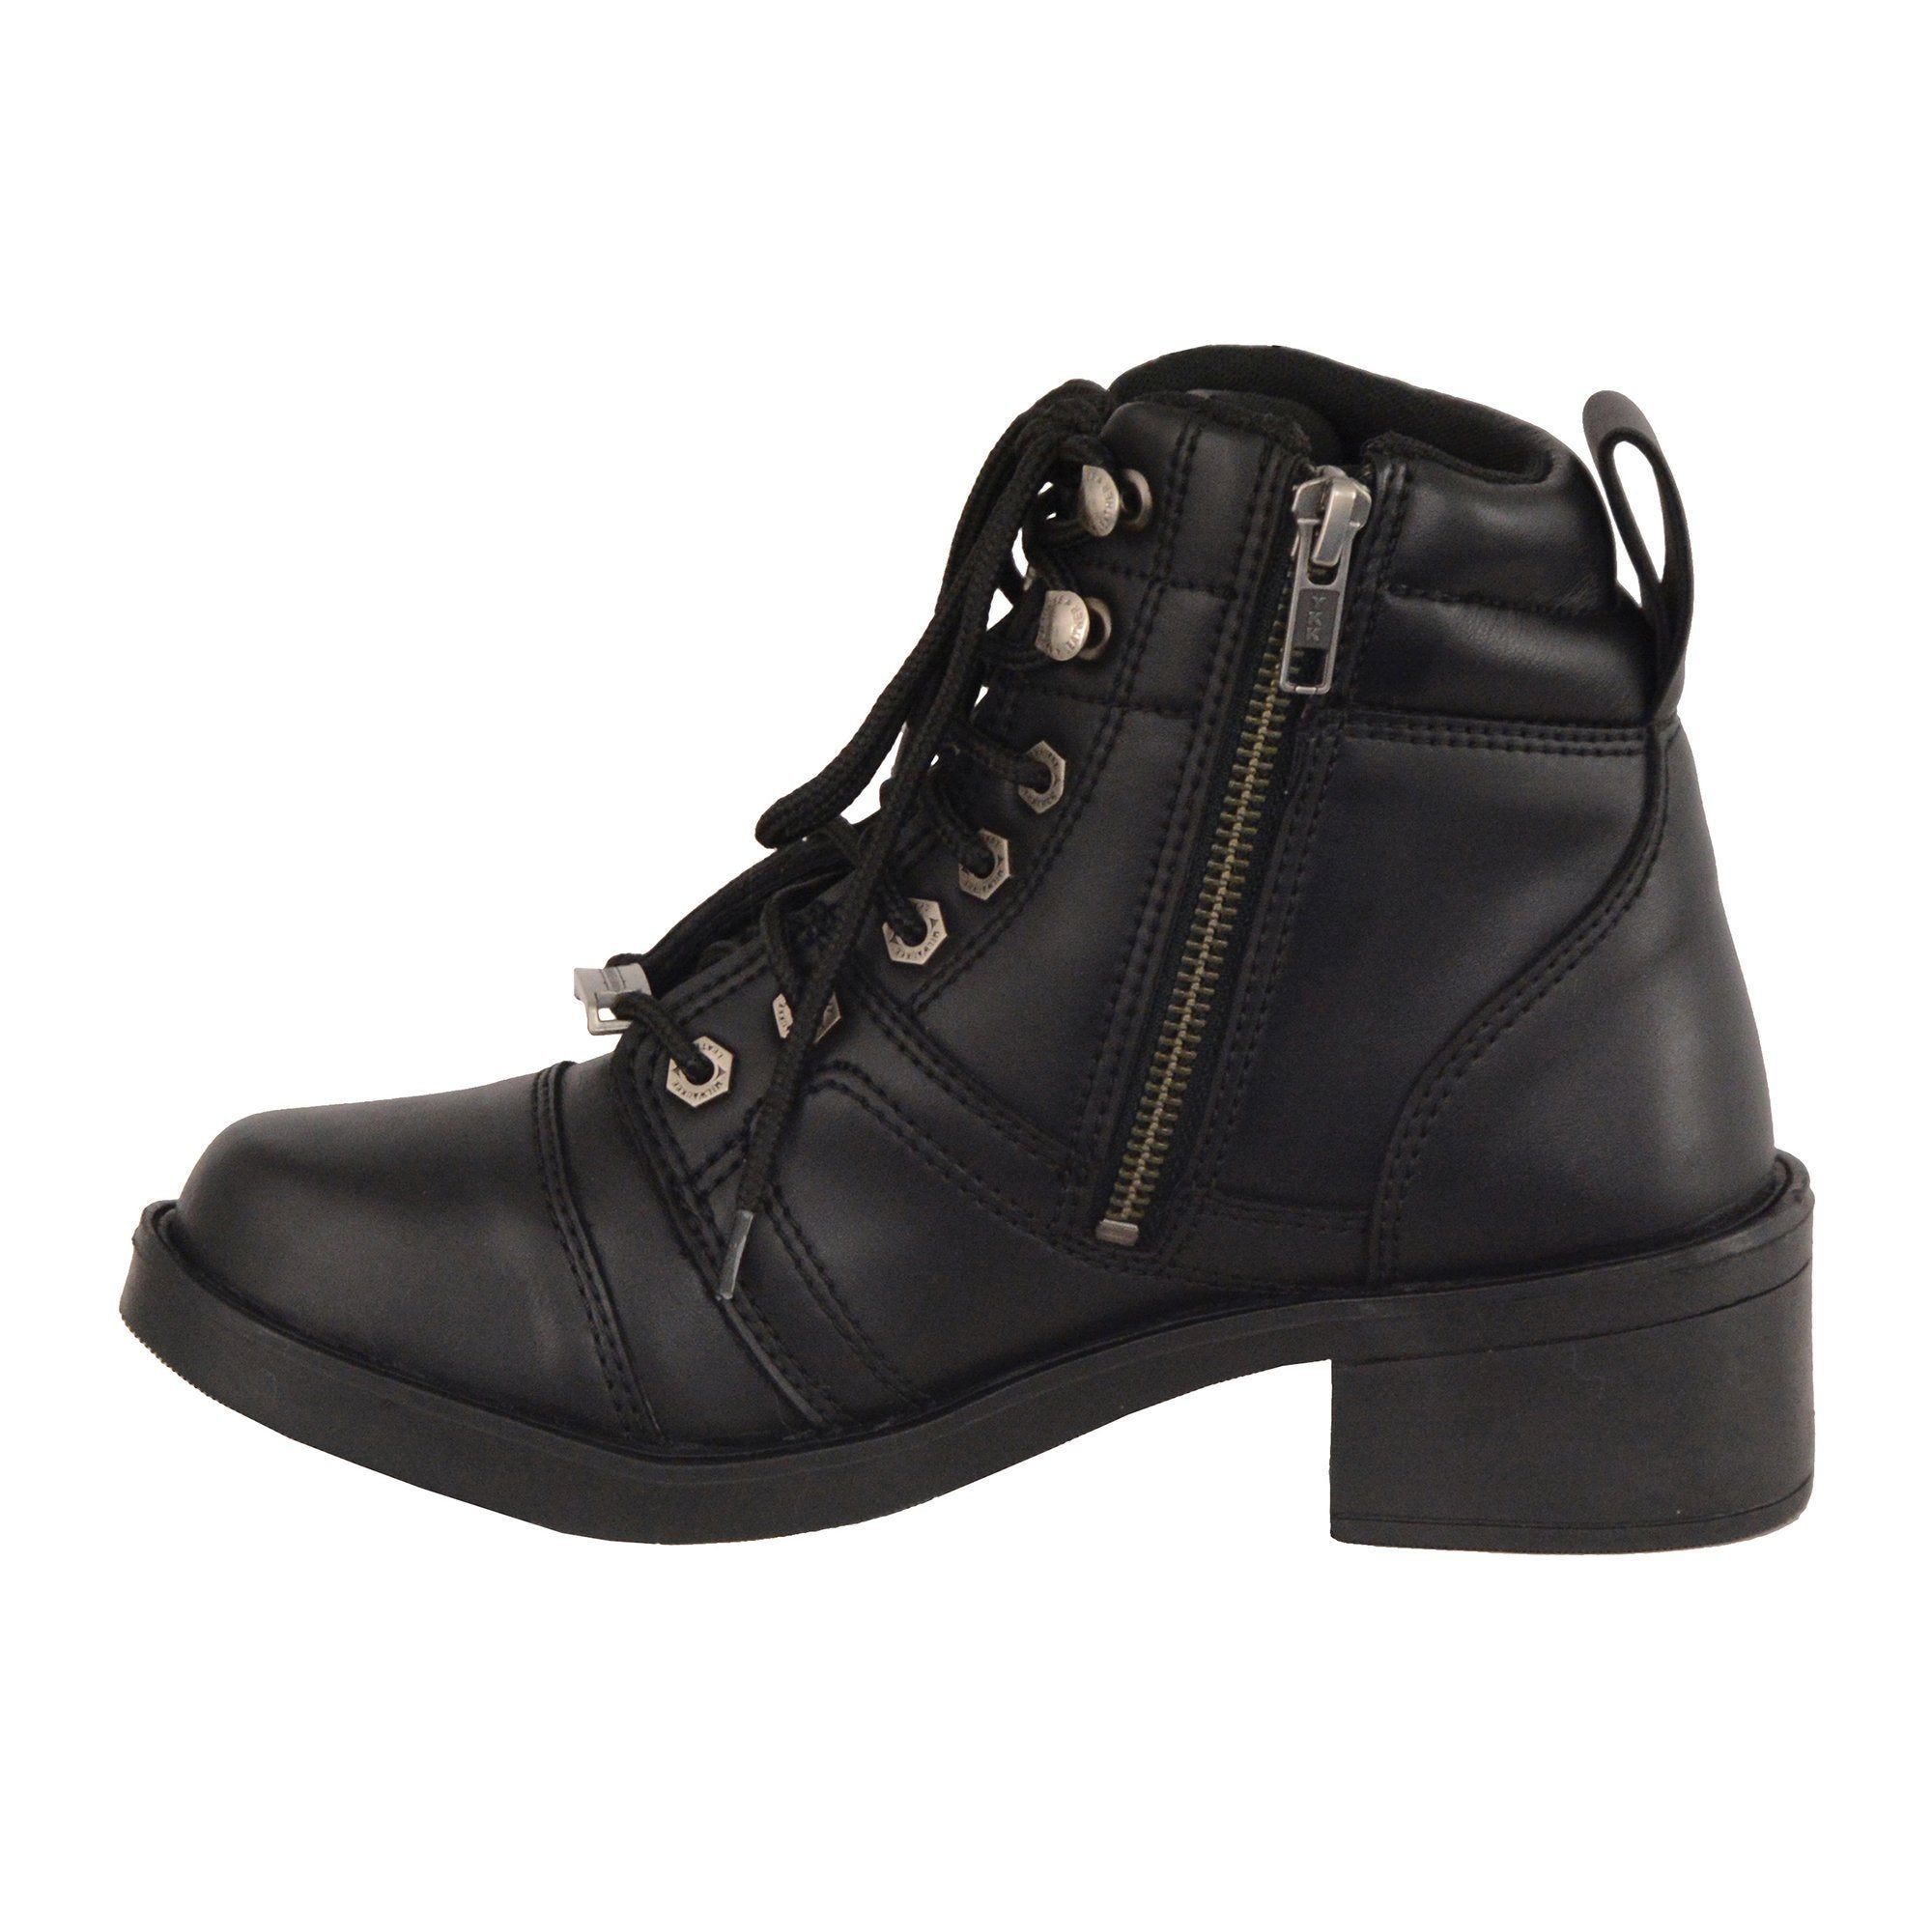 Milwaukee Leather MBK9255 Boys Black Lace-Up Boots with Side Zipper Entry